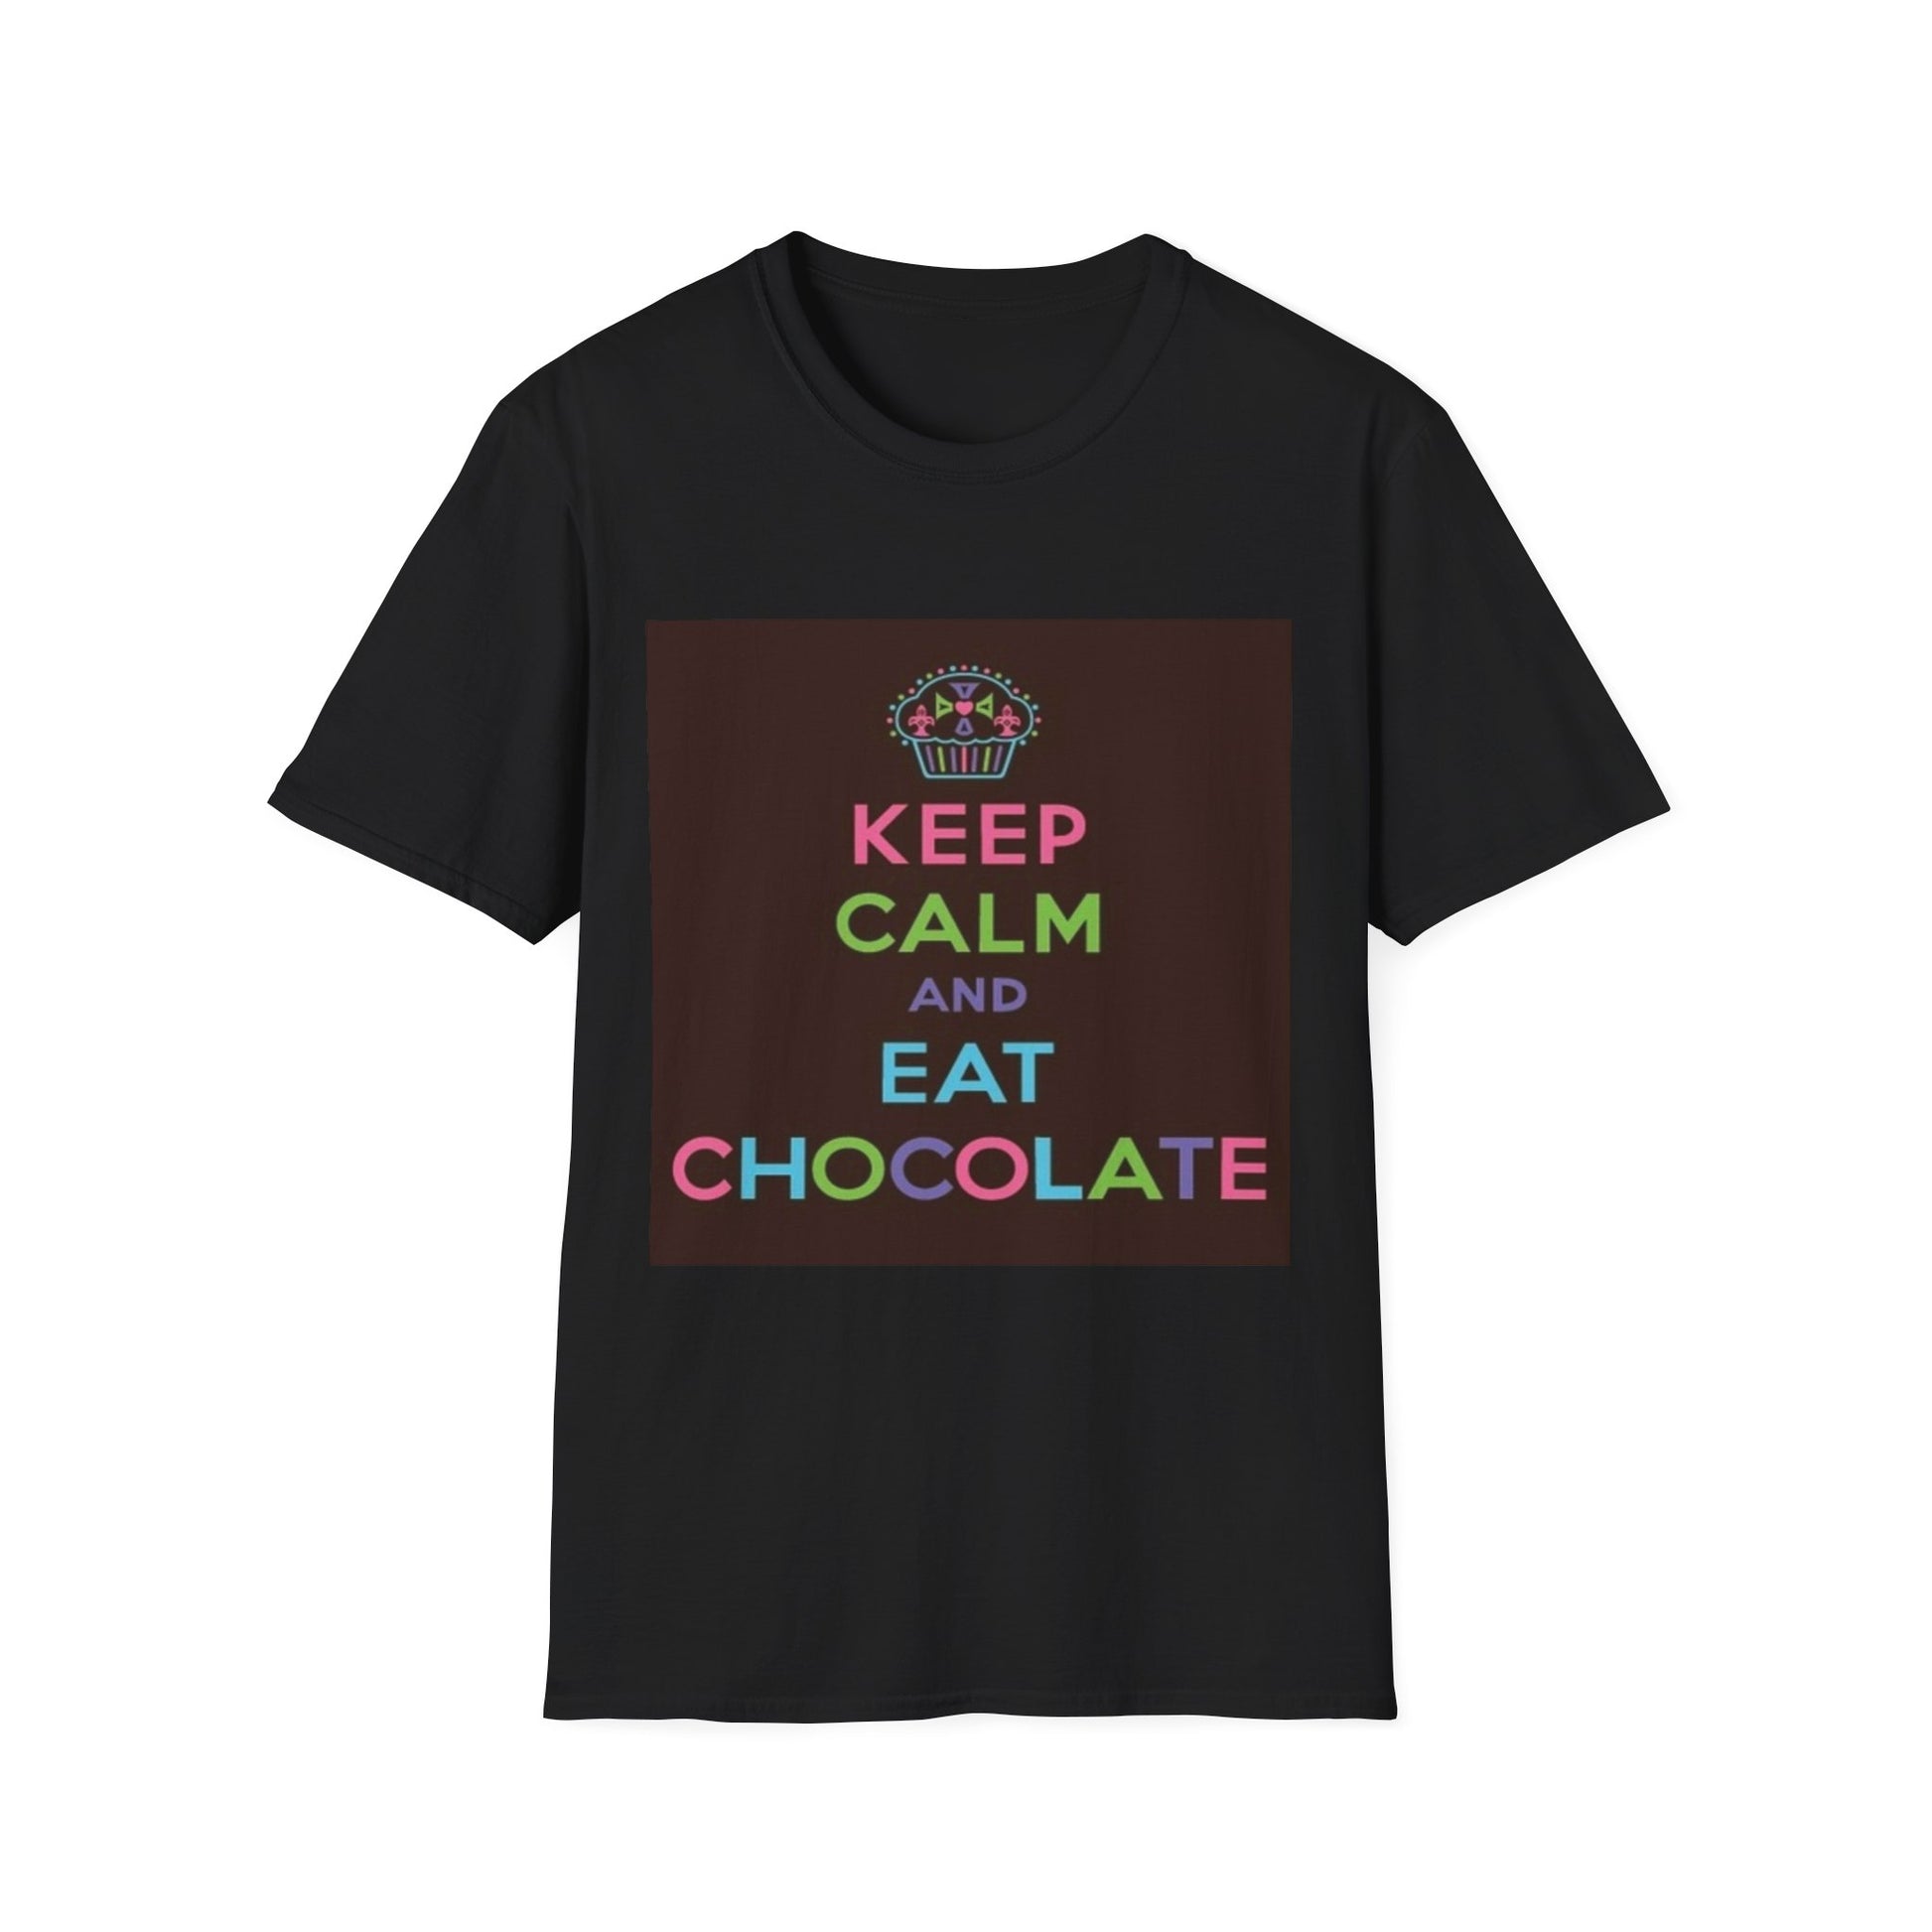 A black t-shirt with a design of the popular quote: Keep Calm And Eat Chocolate.